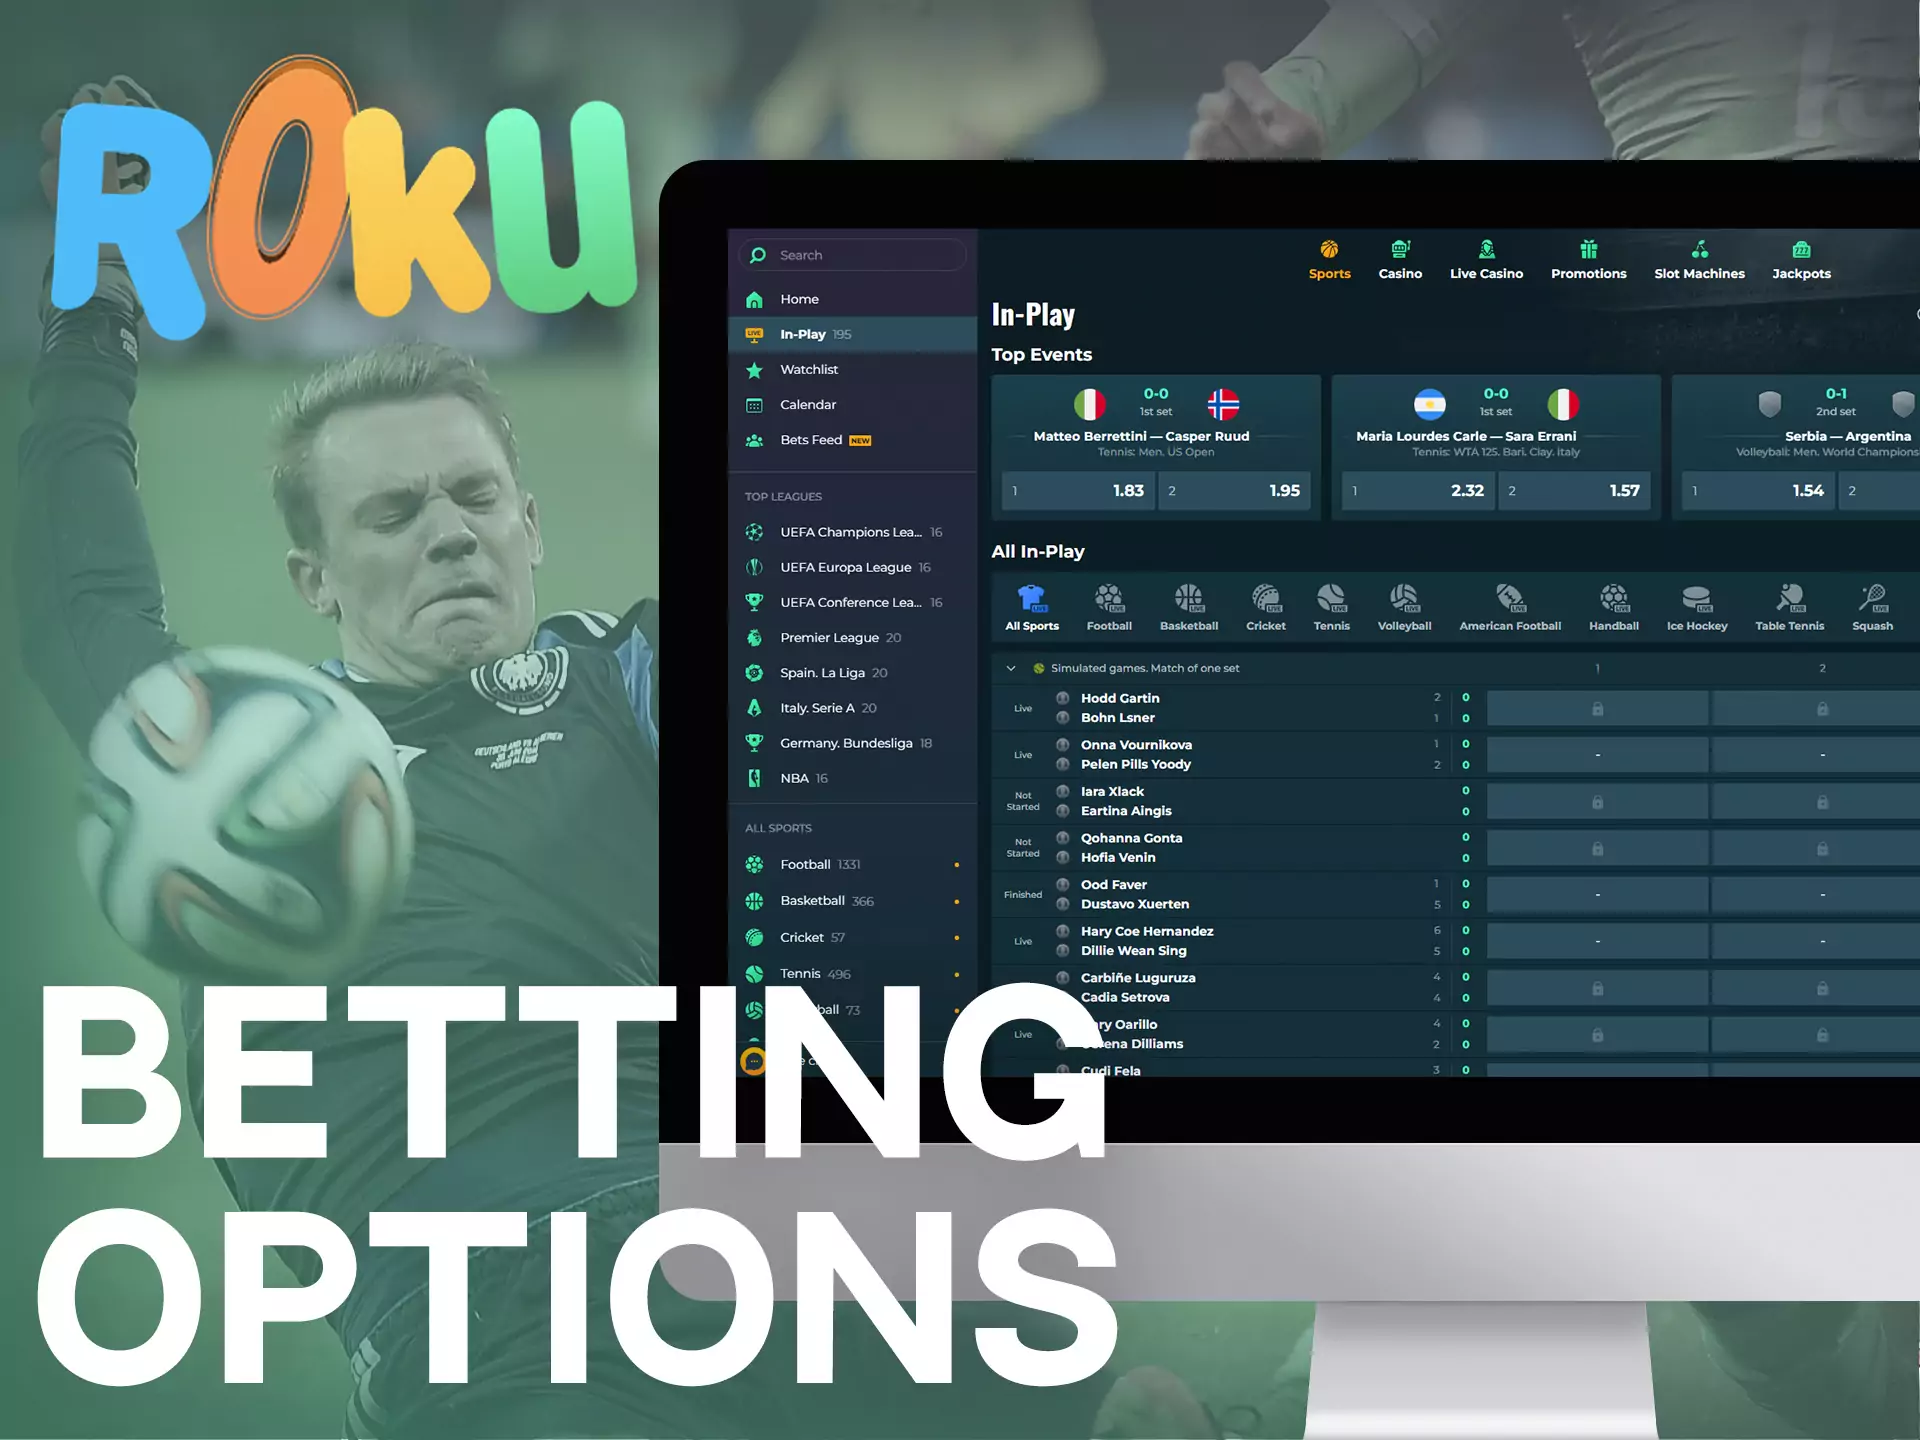 On the Rokubet website, you can choose between different betting options.